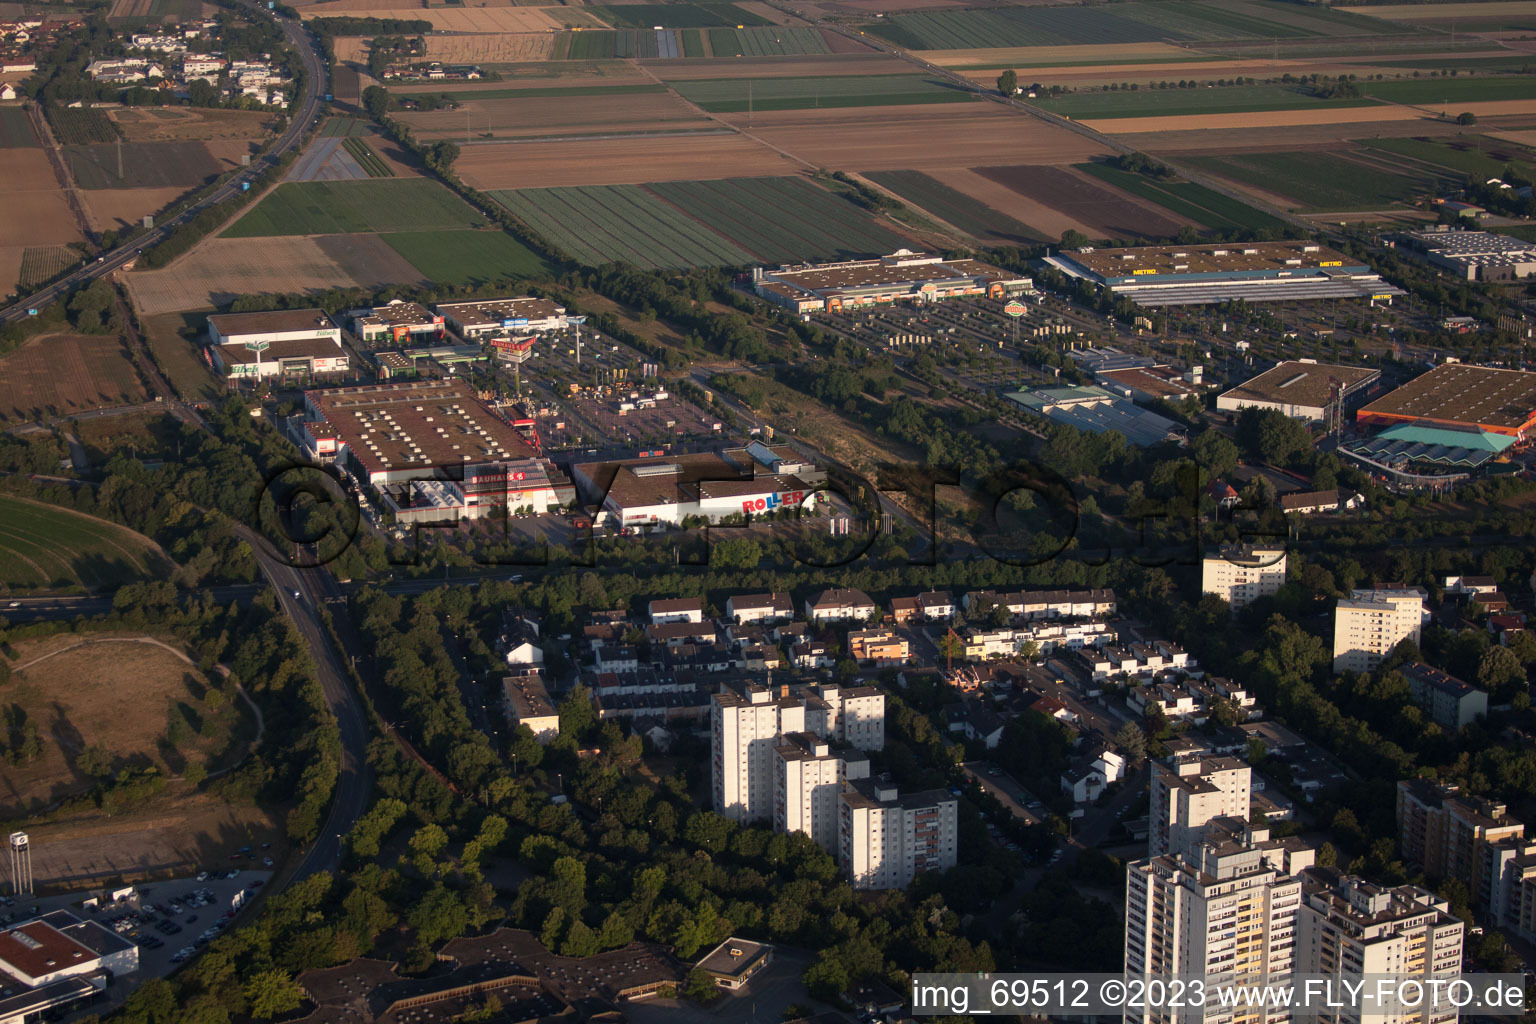 District Oggersheim in Ludwigshafen am Rhein in the state Rhineland-Palatinate, Germany seen from above